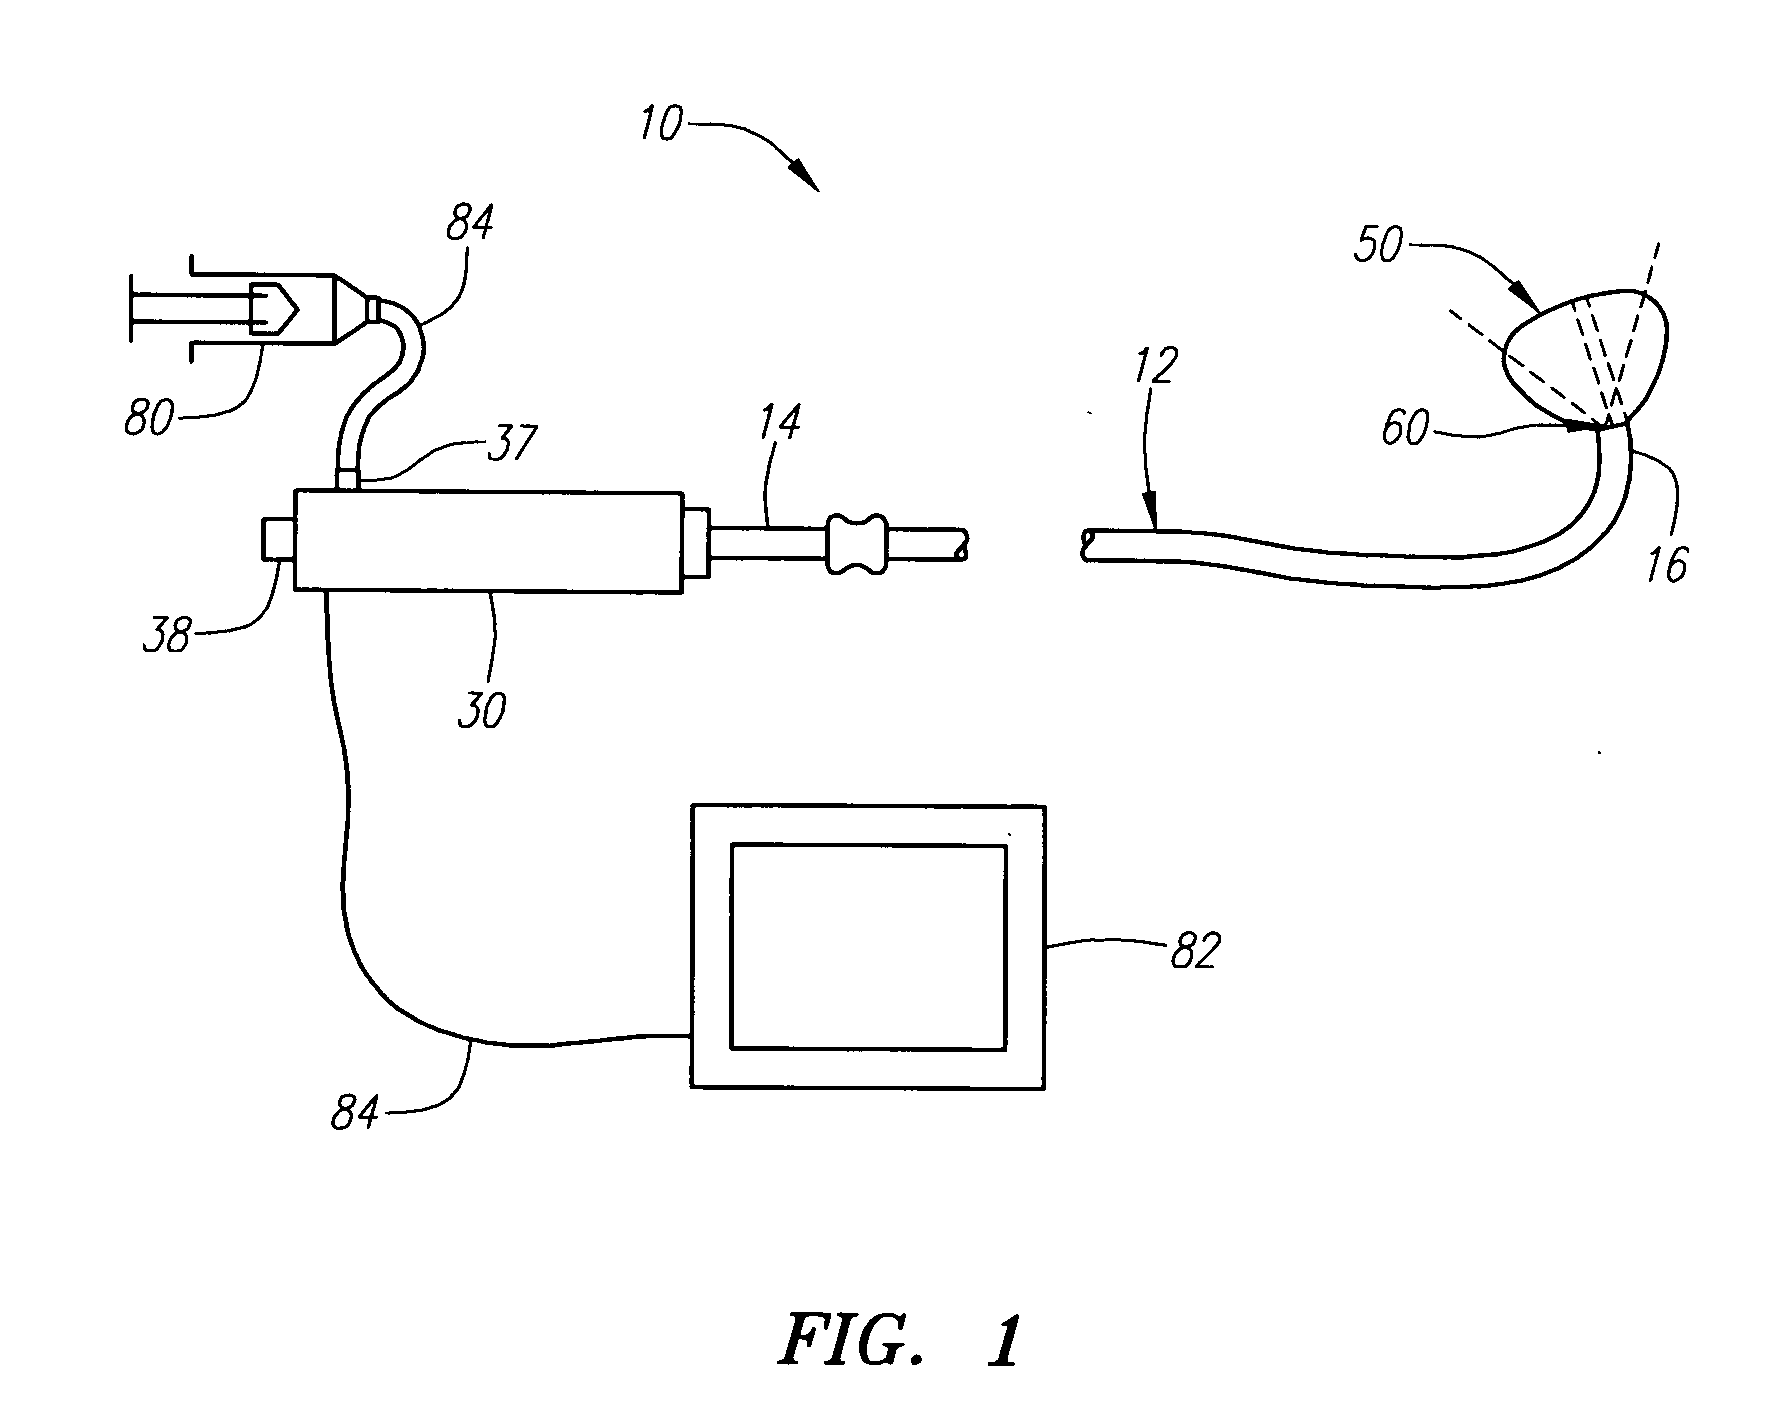 Variable steerable catheters and methods for using them